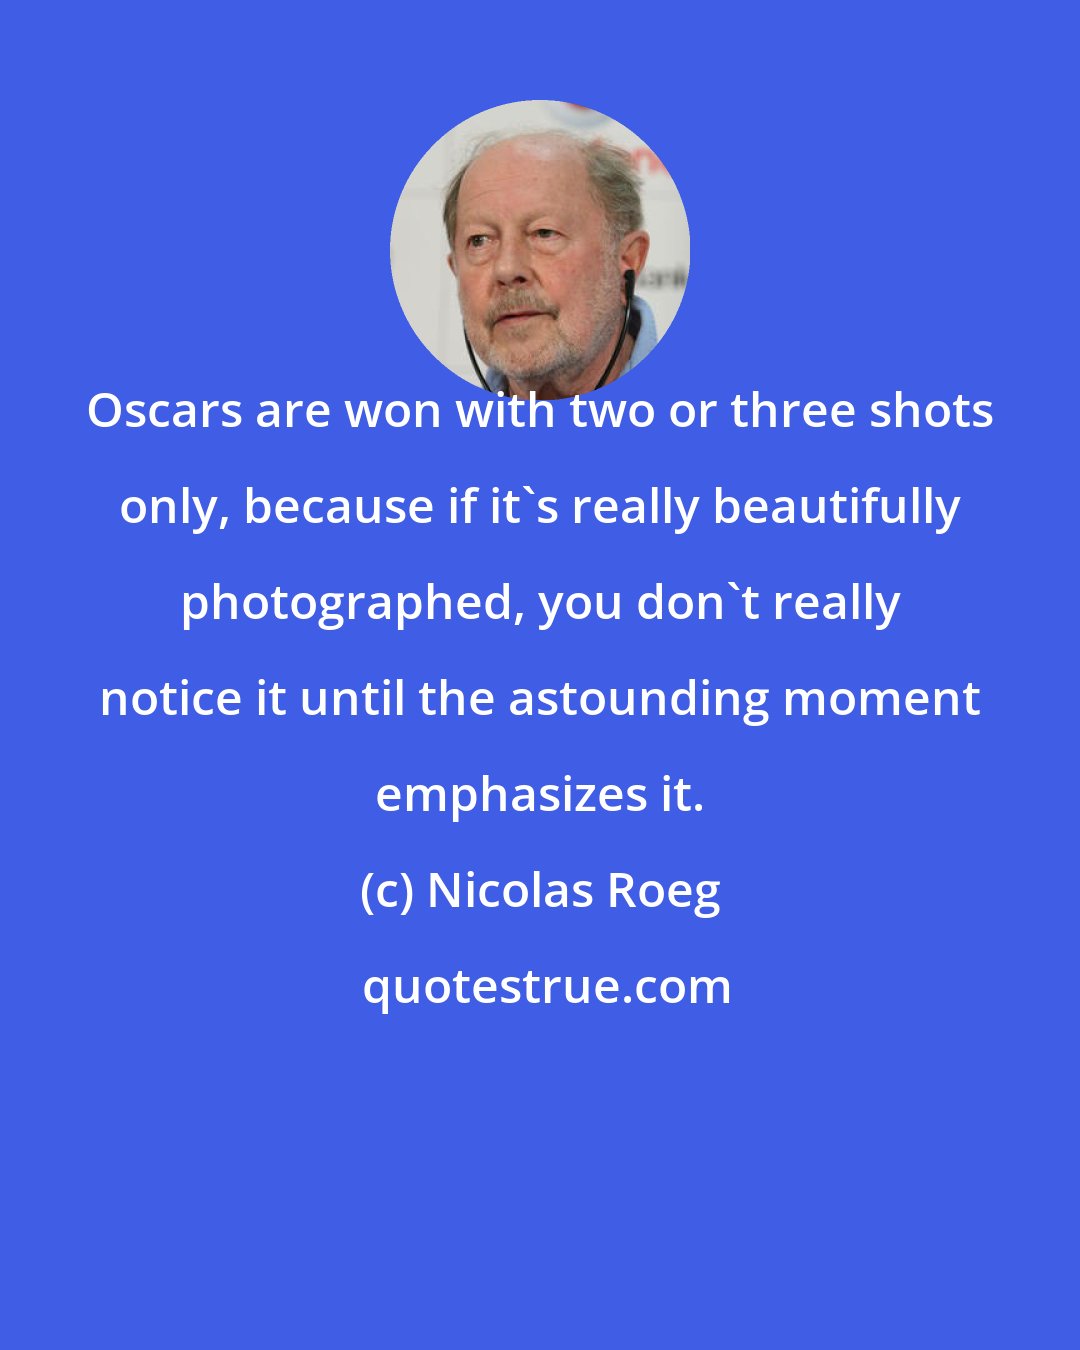 Nicolas Roeg: Oscars are won with two or three shots only, because if it's really beautifully photographed, you don't really notice it until the astounding moment emphasizes it.